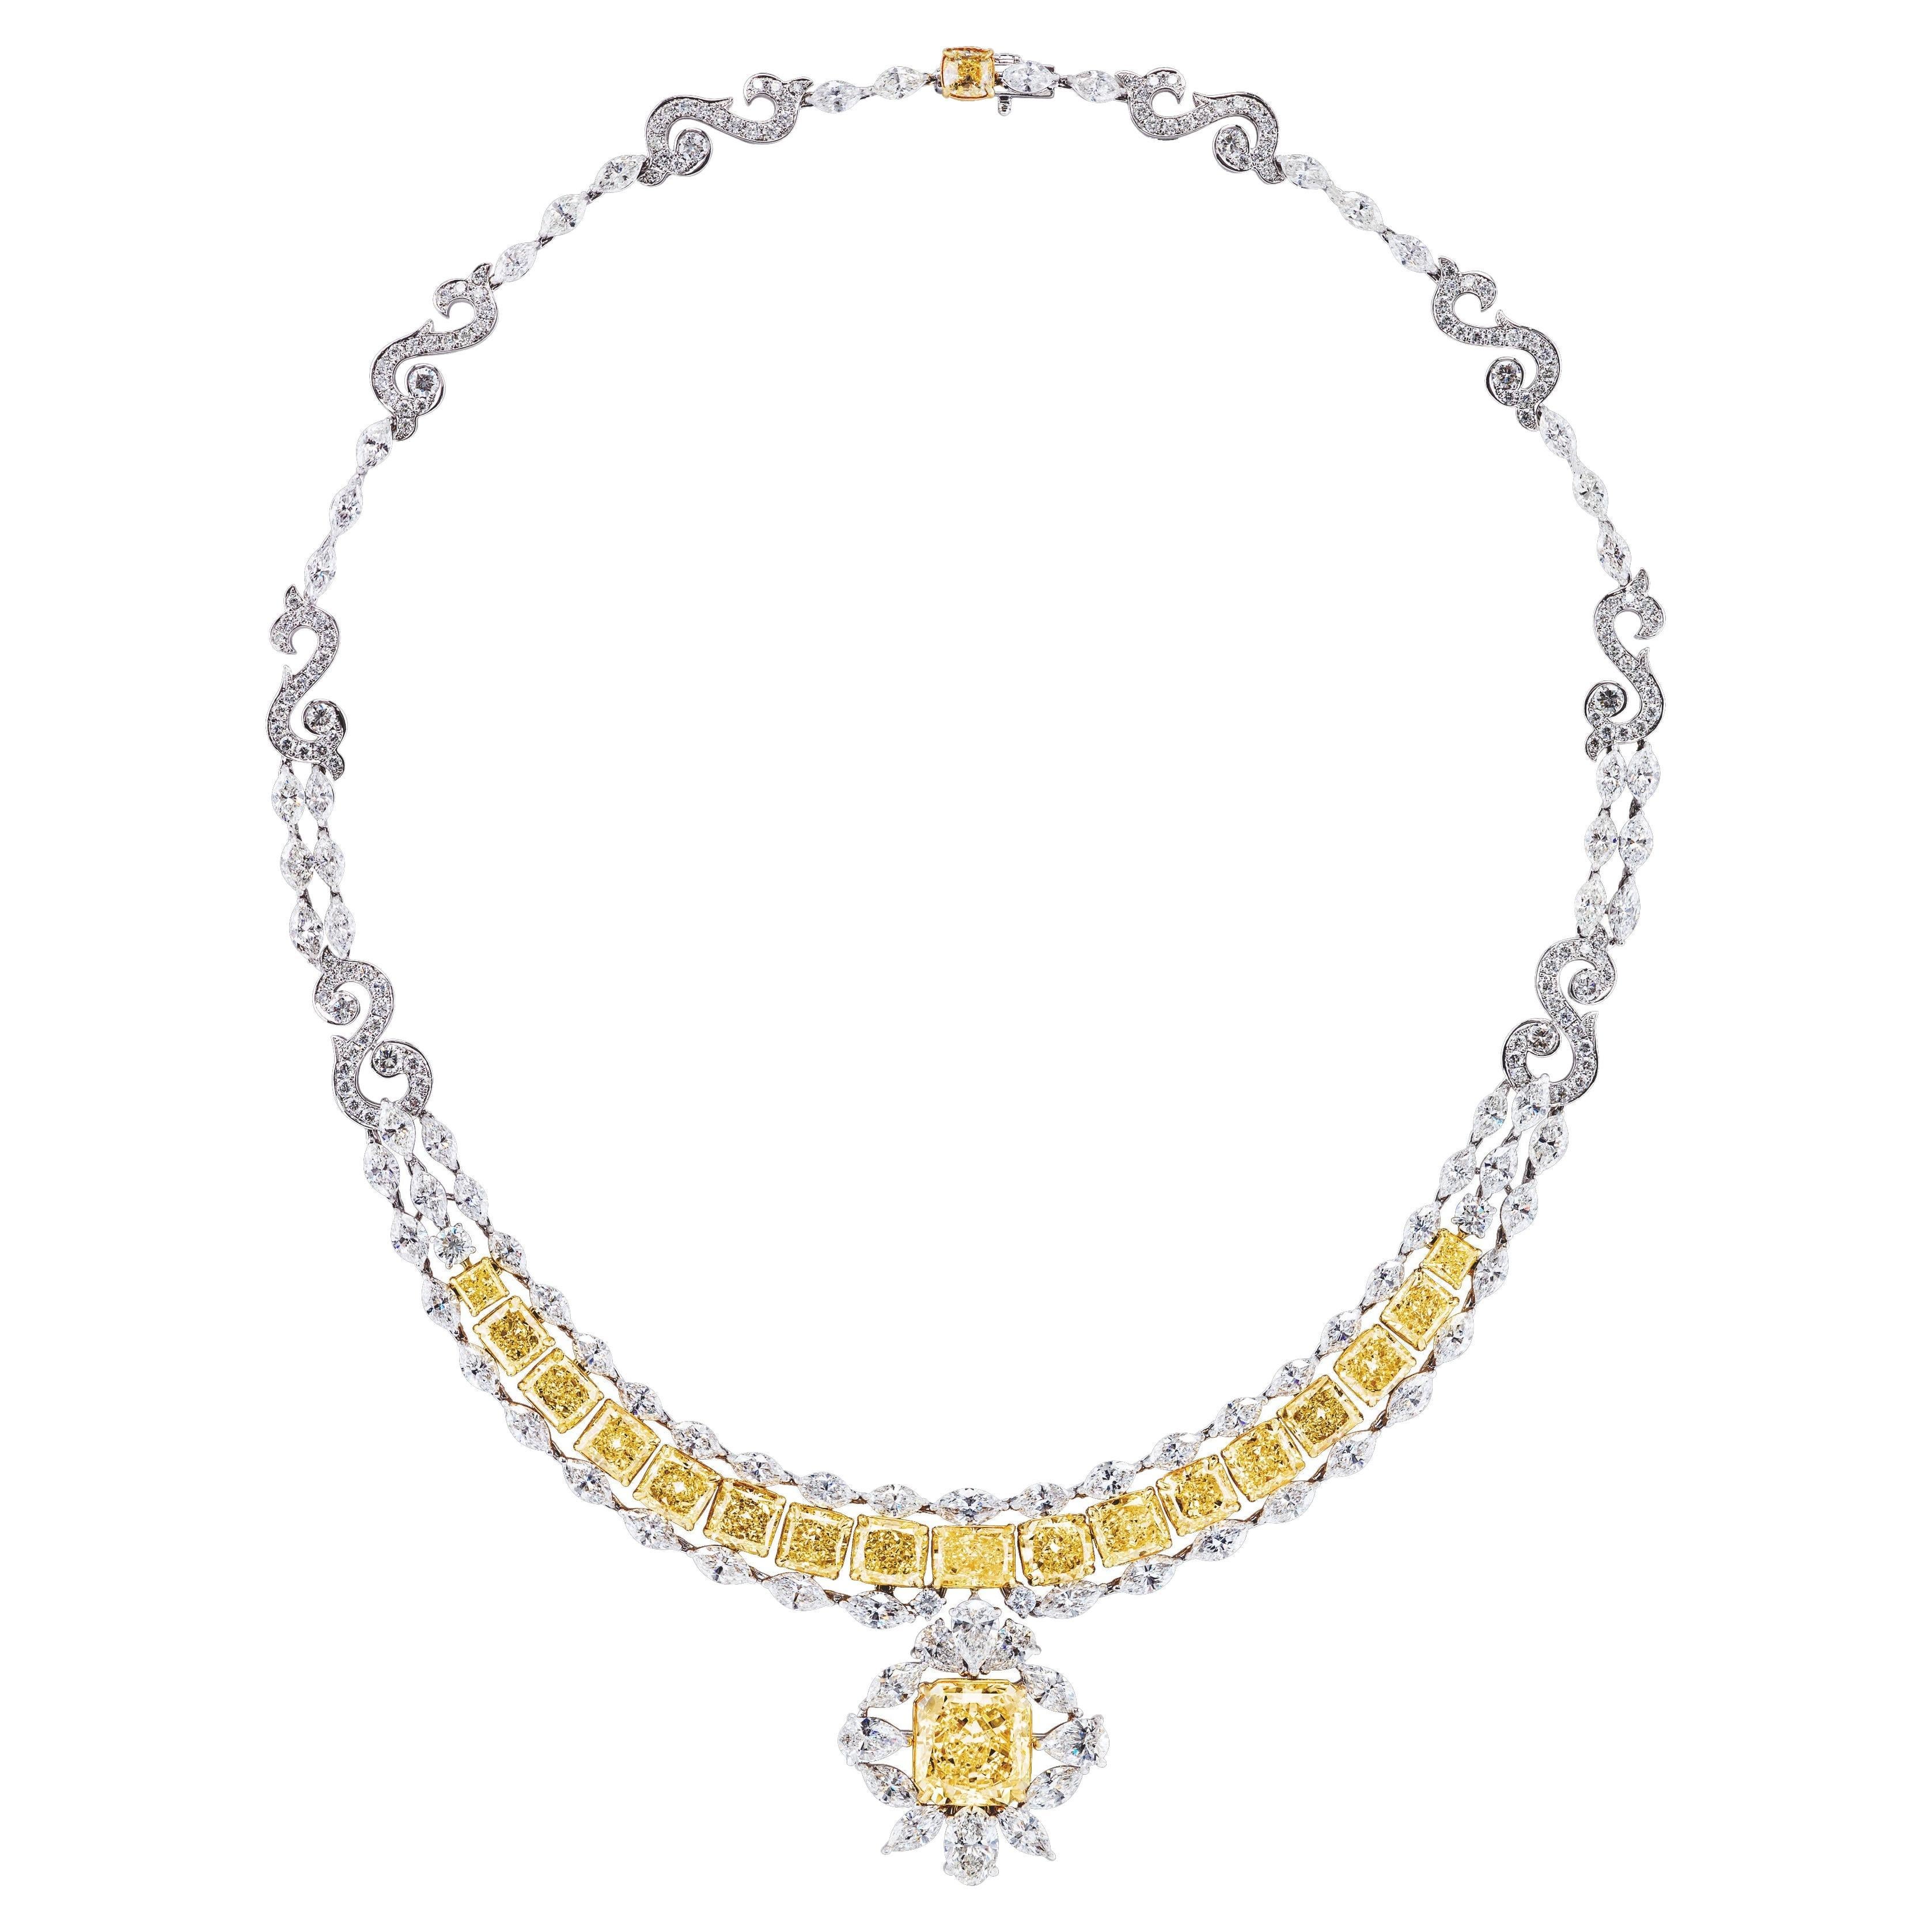 Extraordinary GIA Certified 50 Carat Fancy Yellow Diamond Necklace in 18K Gold For Sale